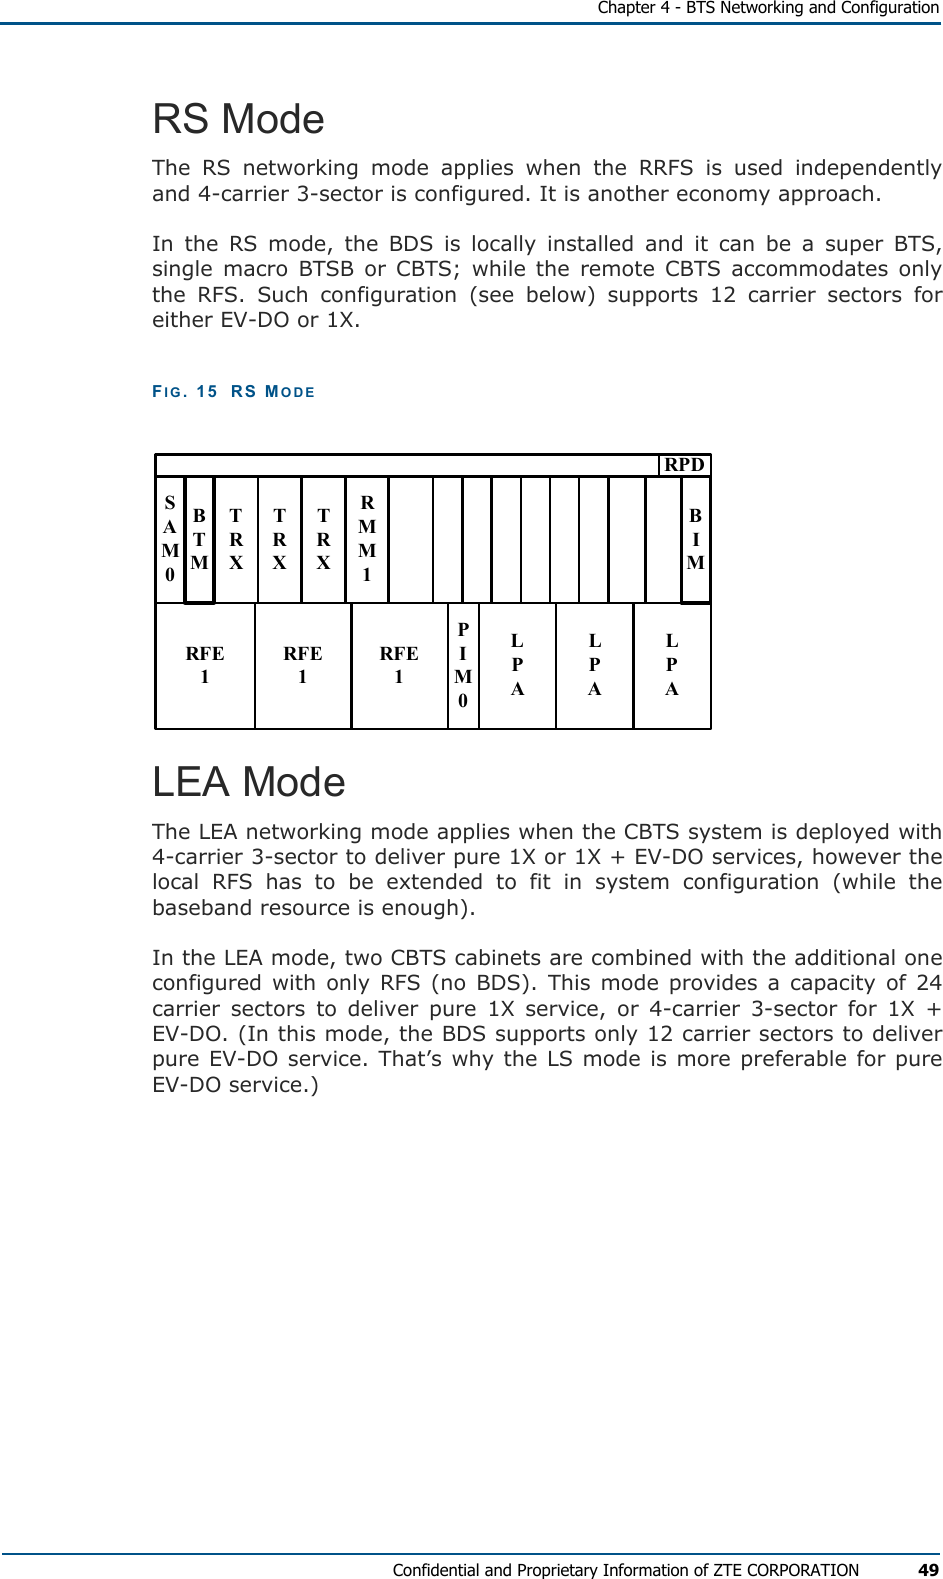   Chapter 4 - BTS Networking and Configuration Confidential and Proprietary Information of ZTE CORPORATION 49 RS Mode The RS networking mode applies when the RRFS is used independently and 4-carrier 3-sector is configured. It is another economy approach.  In the RS mode, the BDS is locally installed and it can be a super BTS, single macro BTSB or CBTS; while the remote CBTS accommodates only the RFS. Such configuration (see below) supports 12 carrier sectors for either EV-DO or 1X.  FIG. 15  RS MODE TRXTRXTRXRMM1RPDSAM0LPAPIM0LPALPARFE1RFE1RFE1BTMBIM LEA Mode The LEA networking mode applies when the CBTS system is deployed with 4-carrier 3-sector to deliver pure 1X or 1X + EV-DO services, however the local RFS has to be extended to fit in system configuration (while the baseband resource is enough).  In the LEA mode, two CBTS cabinets are combined with the additional one configured with only RFS (no BDS). This mode provides a capacity of 24 carrier sectors to deliver pure 1X service, or 4-carrier 3-sector for 1X + EV-DO. (In this mode, the BDS supports only 12 carrier sectors to deliver pure EV-DO service. That’s why the LS mode is more preferable for pure EV-DO service.) 